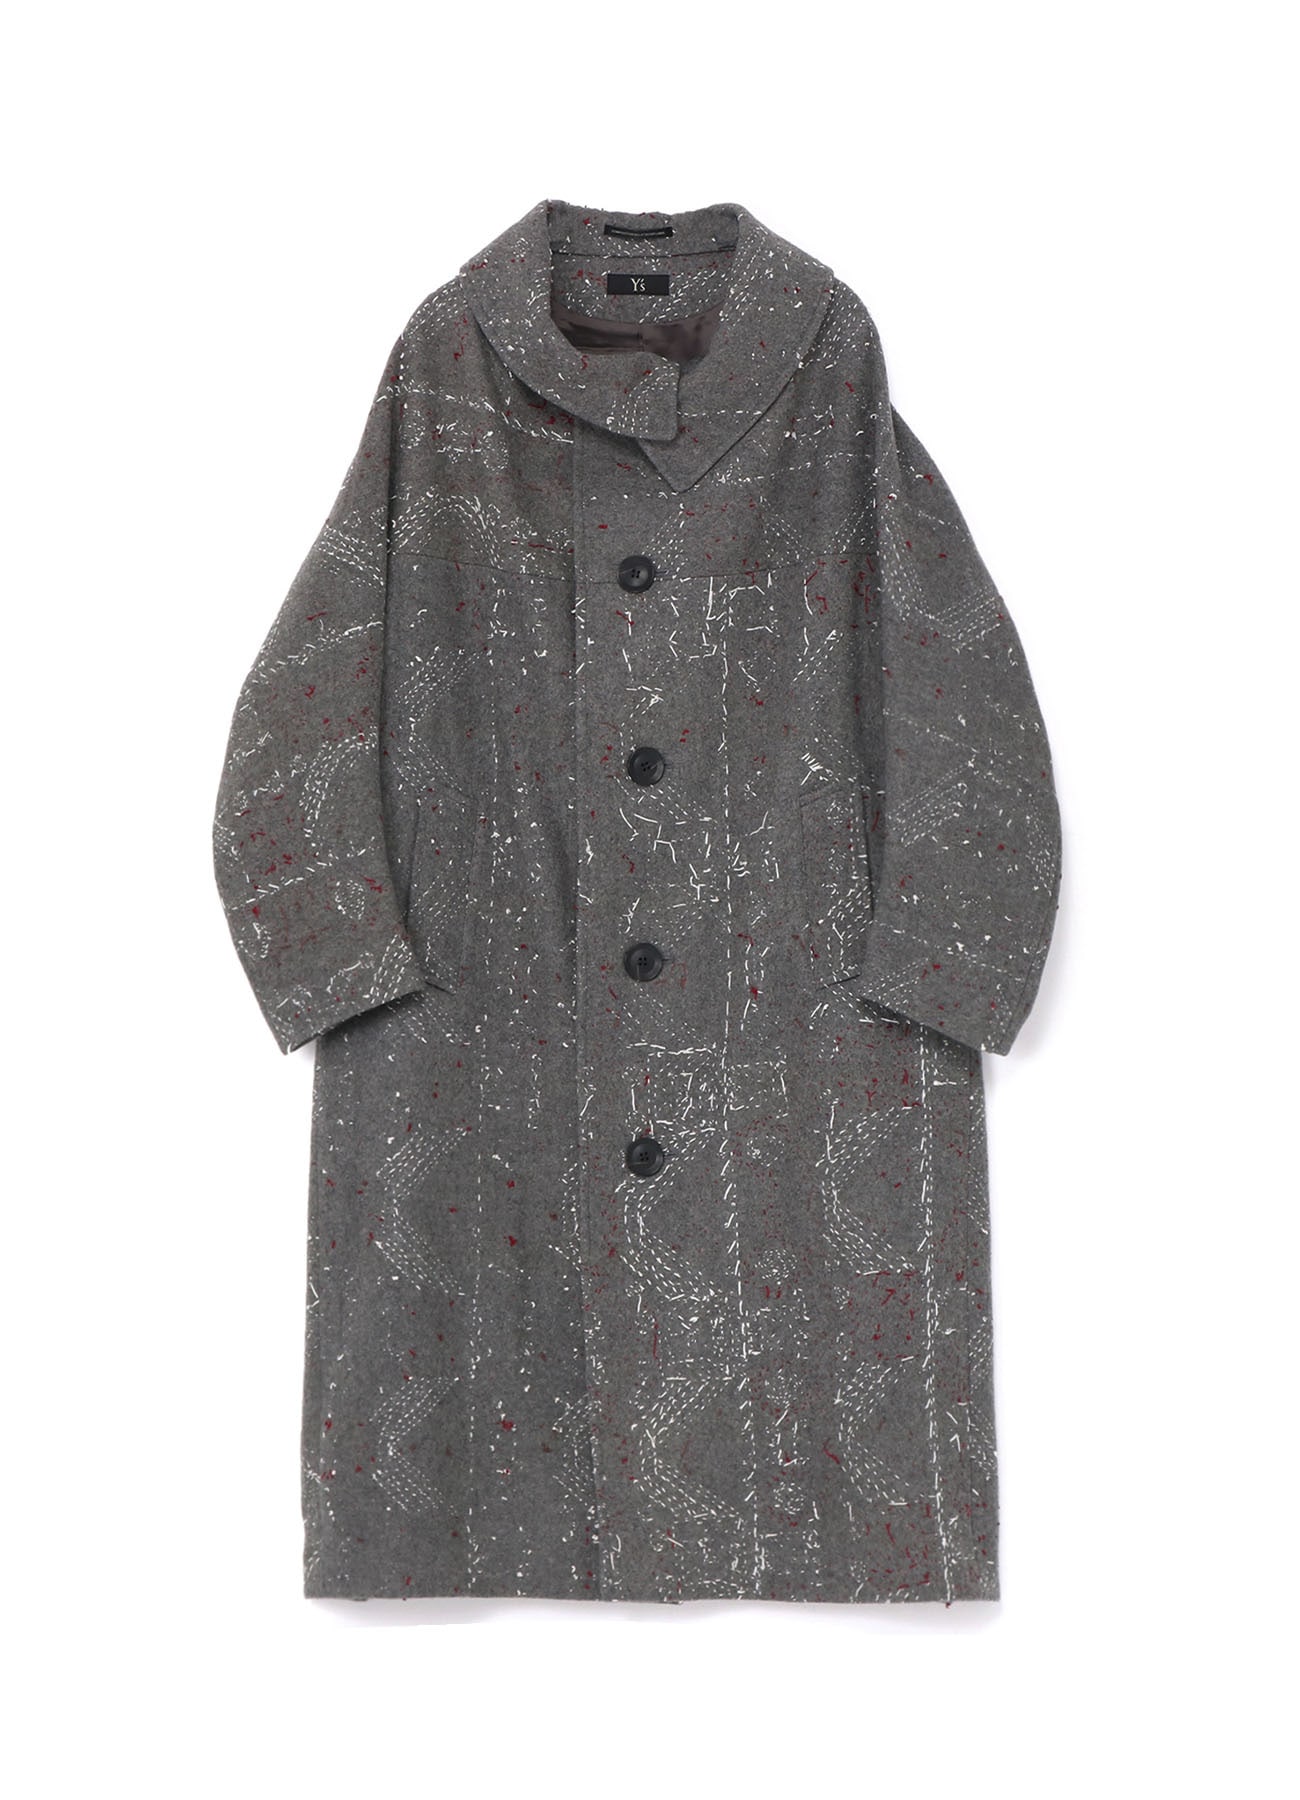 WOOL MOSSER HAND EMBROIDERY LONG CAPE COAT